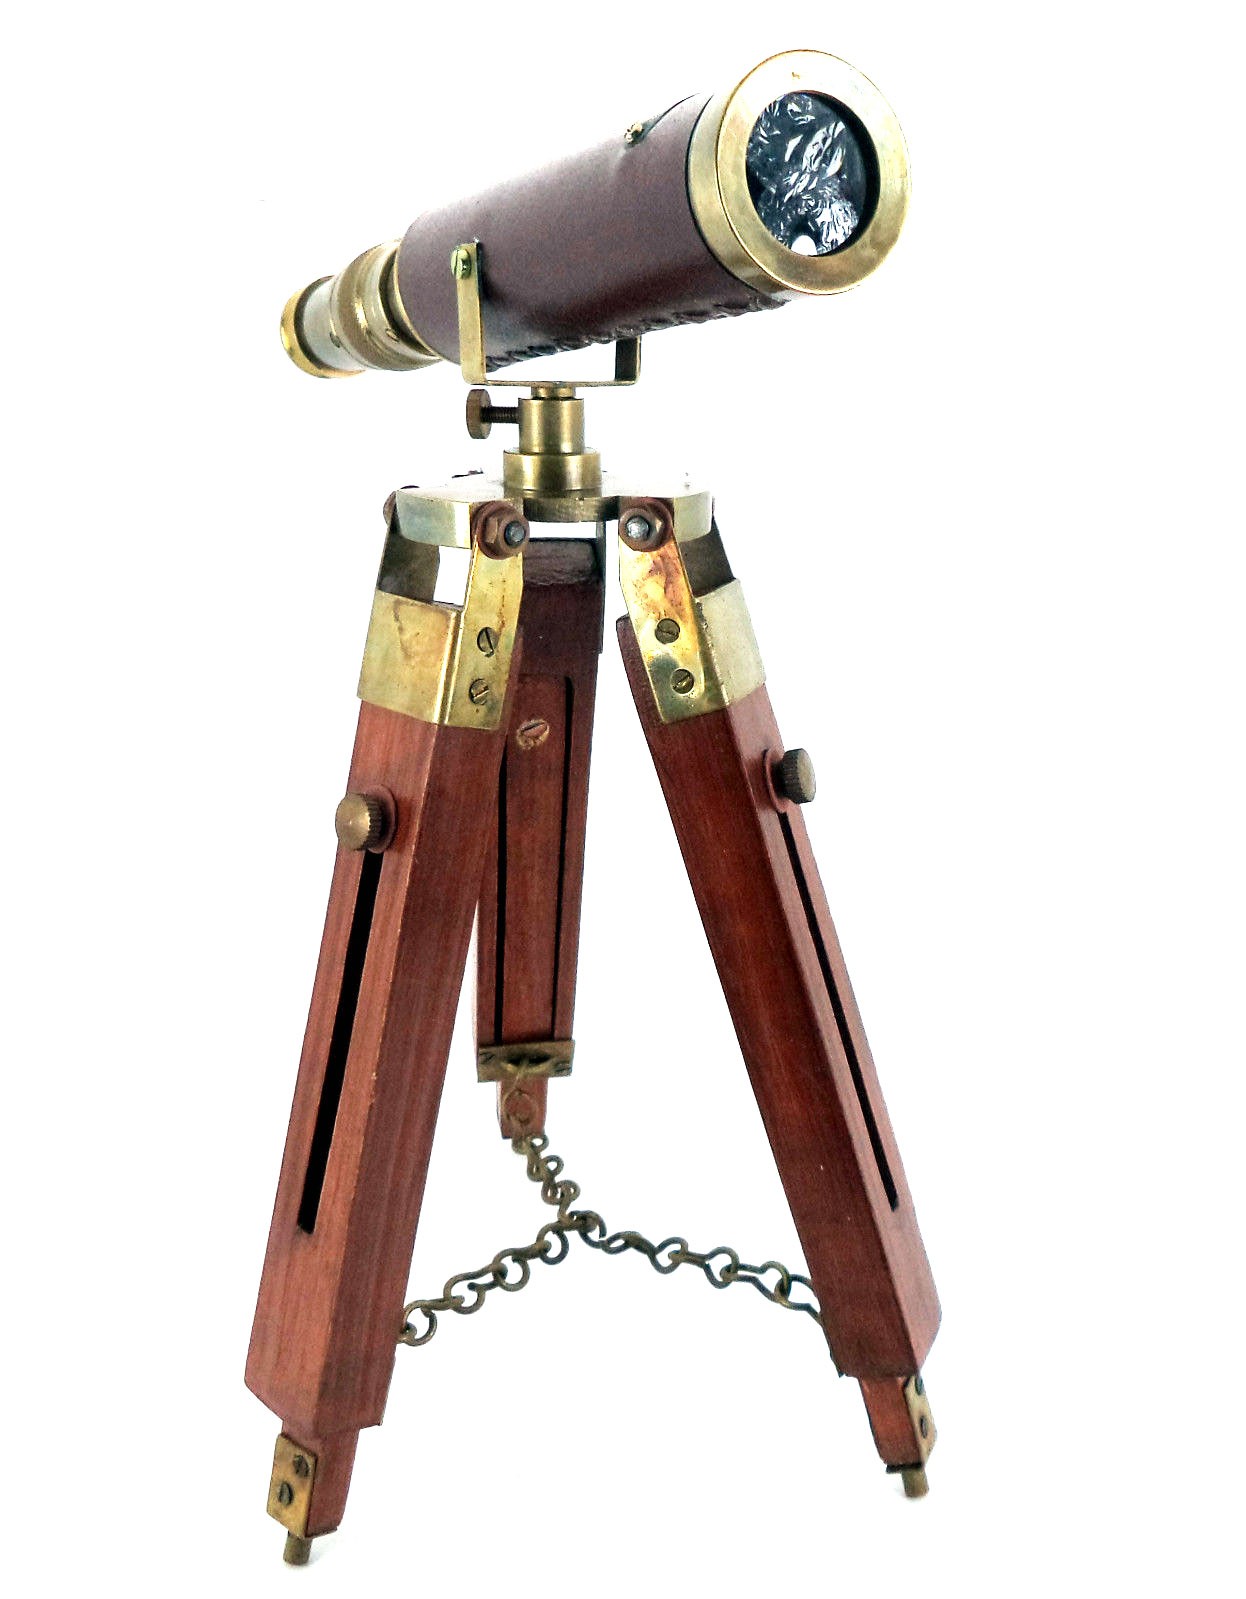 Nautical Brass Maritime Telescope Spy Glass With Wooden Adjustable